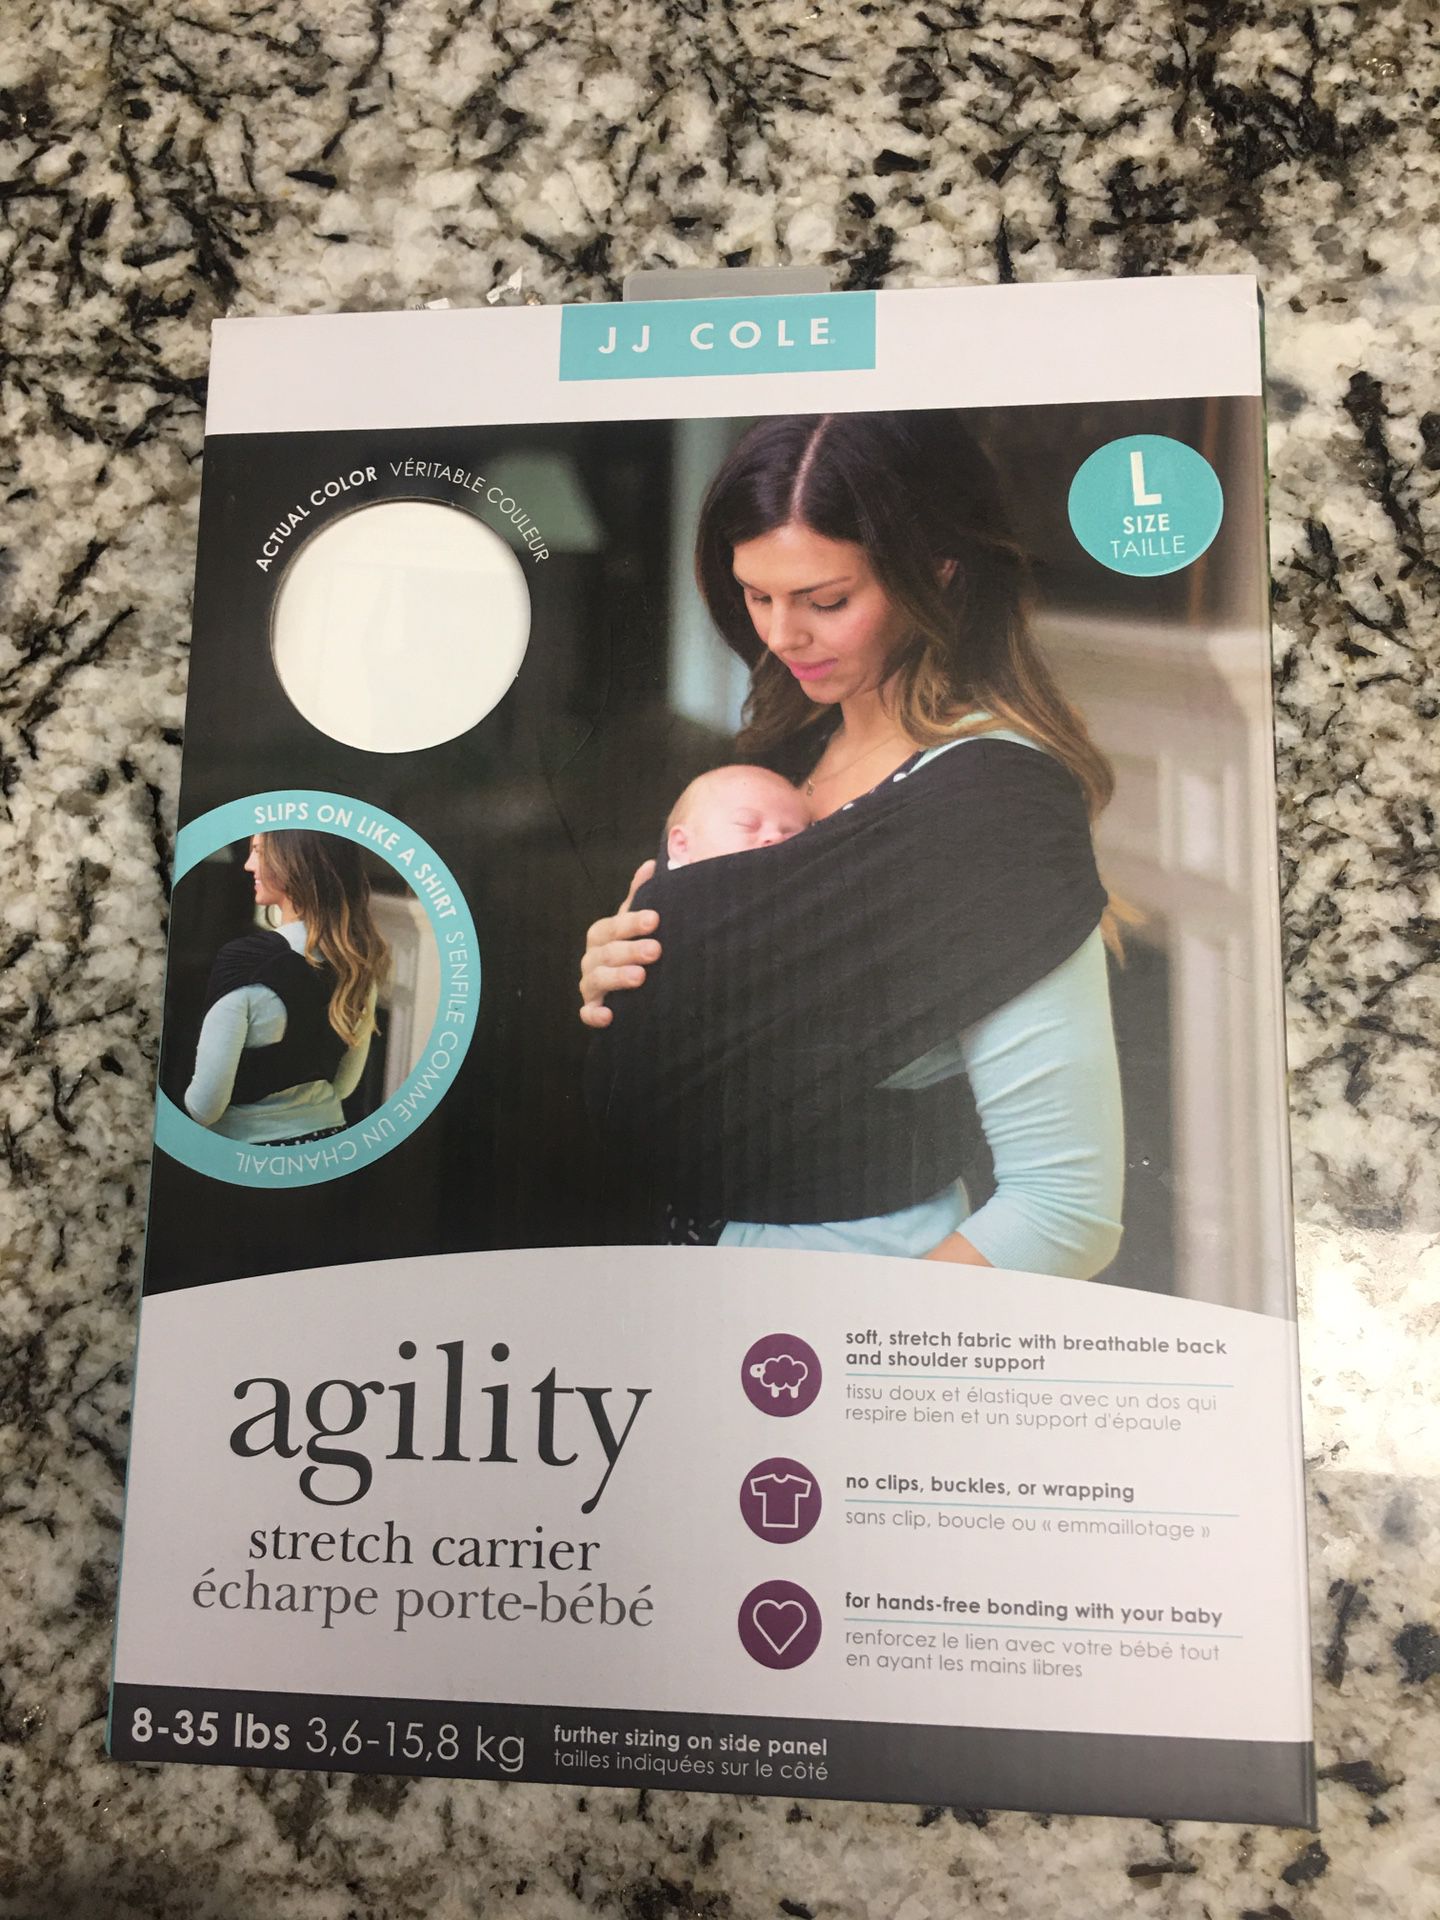 JJ COLE baby stretch carrier